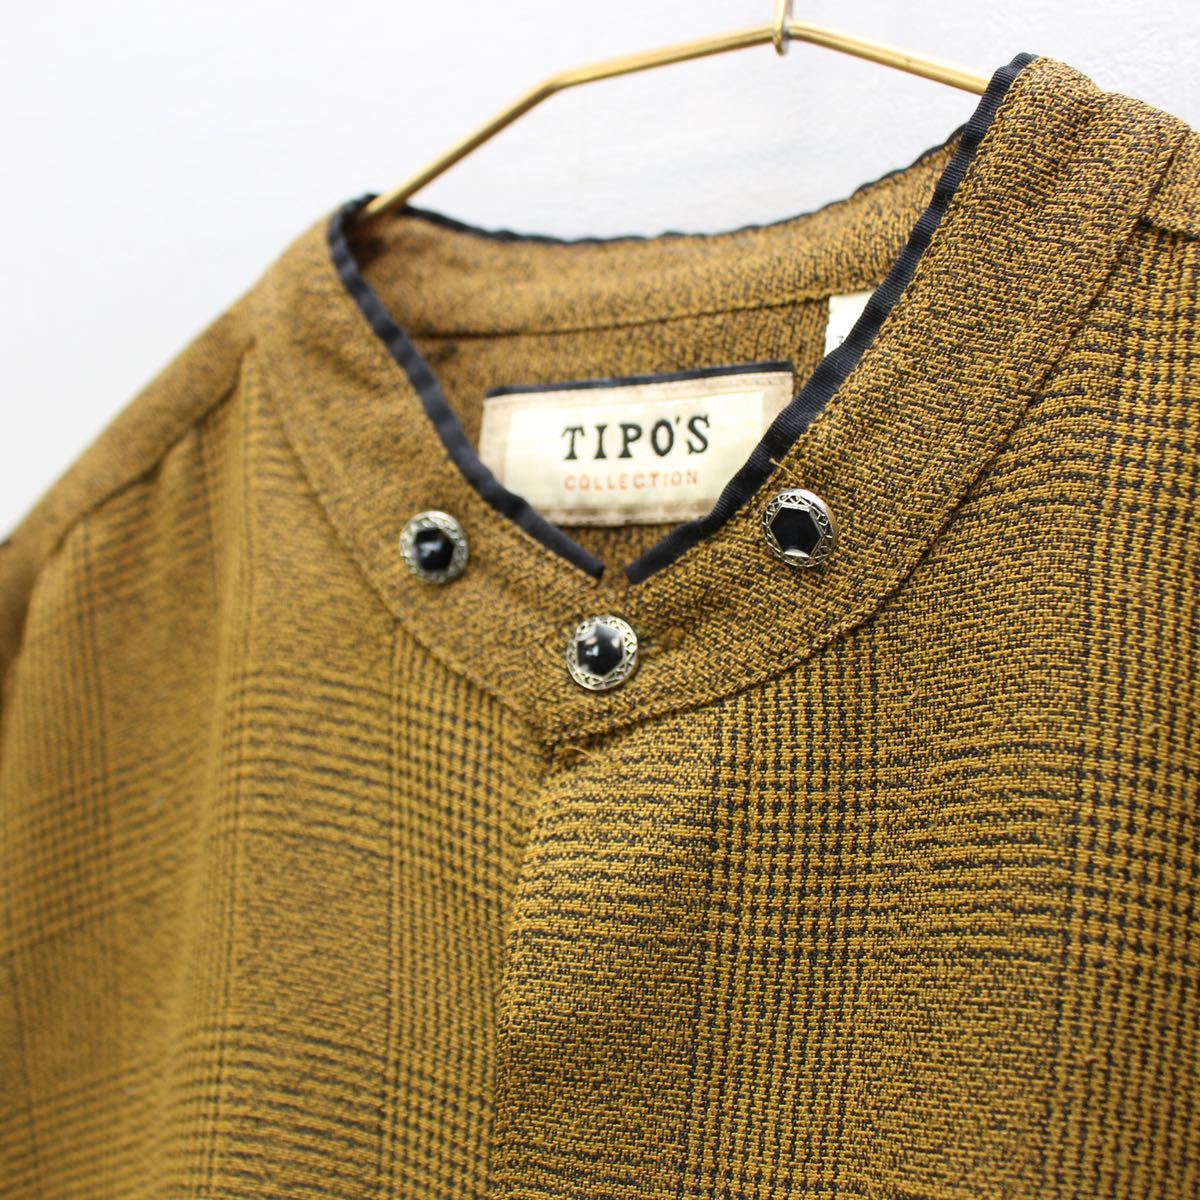 USA VINTAGE TIPO'S COLLECTION BAND COLLAR DESIGN SHIRT/アメリカ古着バンドカラーデザインシャツ